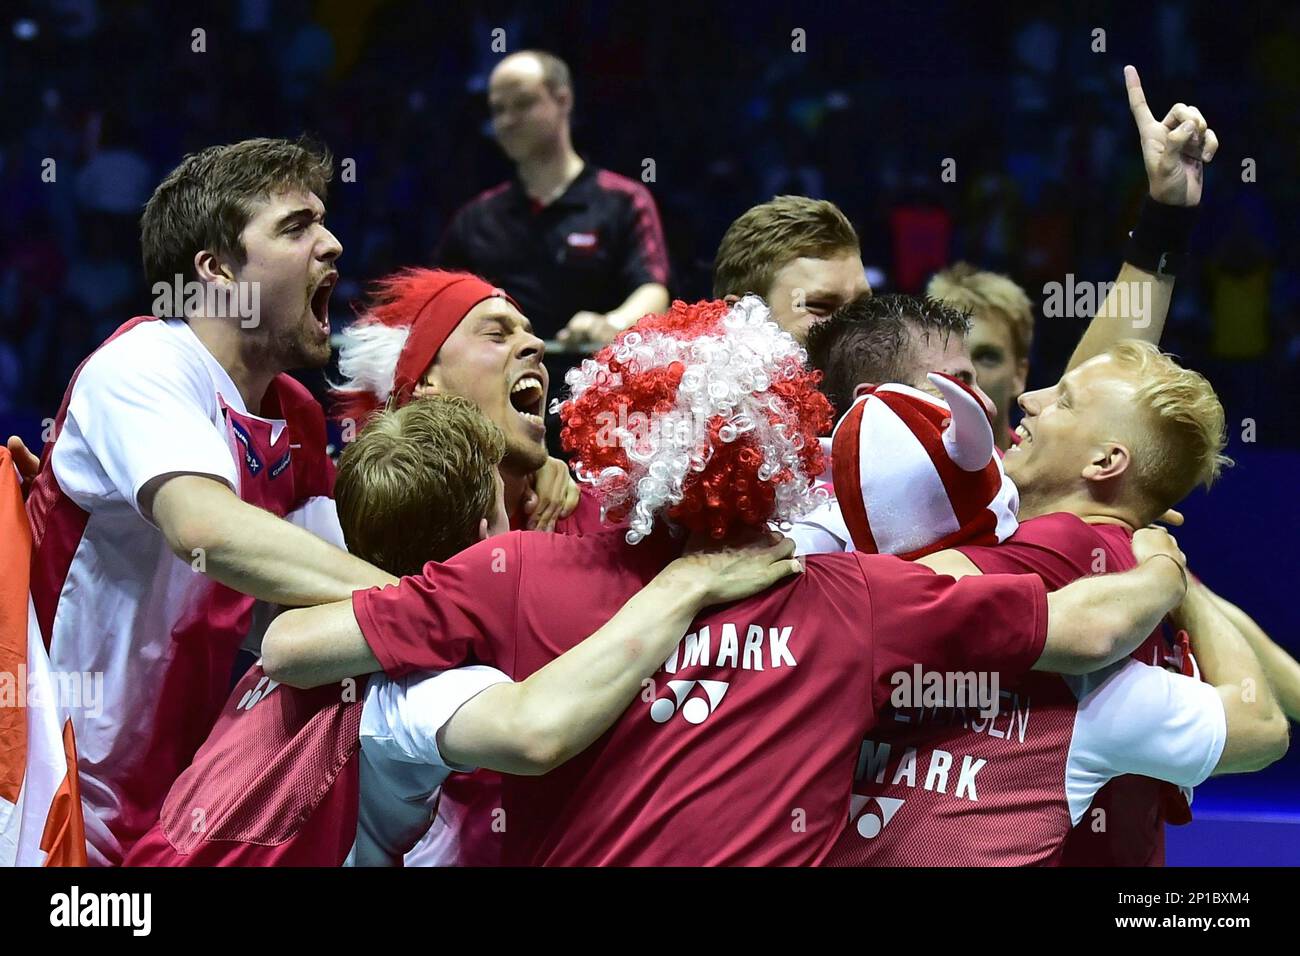 Denmark players celebrate after defeating Indonesia in their mens final group match in the Thomas Cup badminton tournament in Kunshan in east Chinas Jiangsu province, Sunday, May 22, 2016